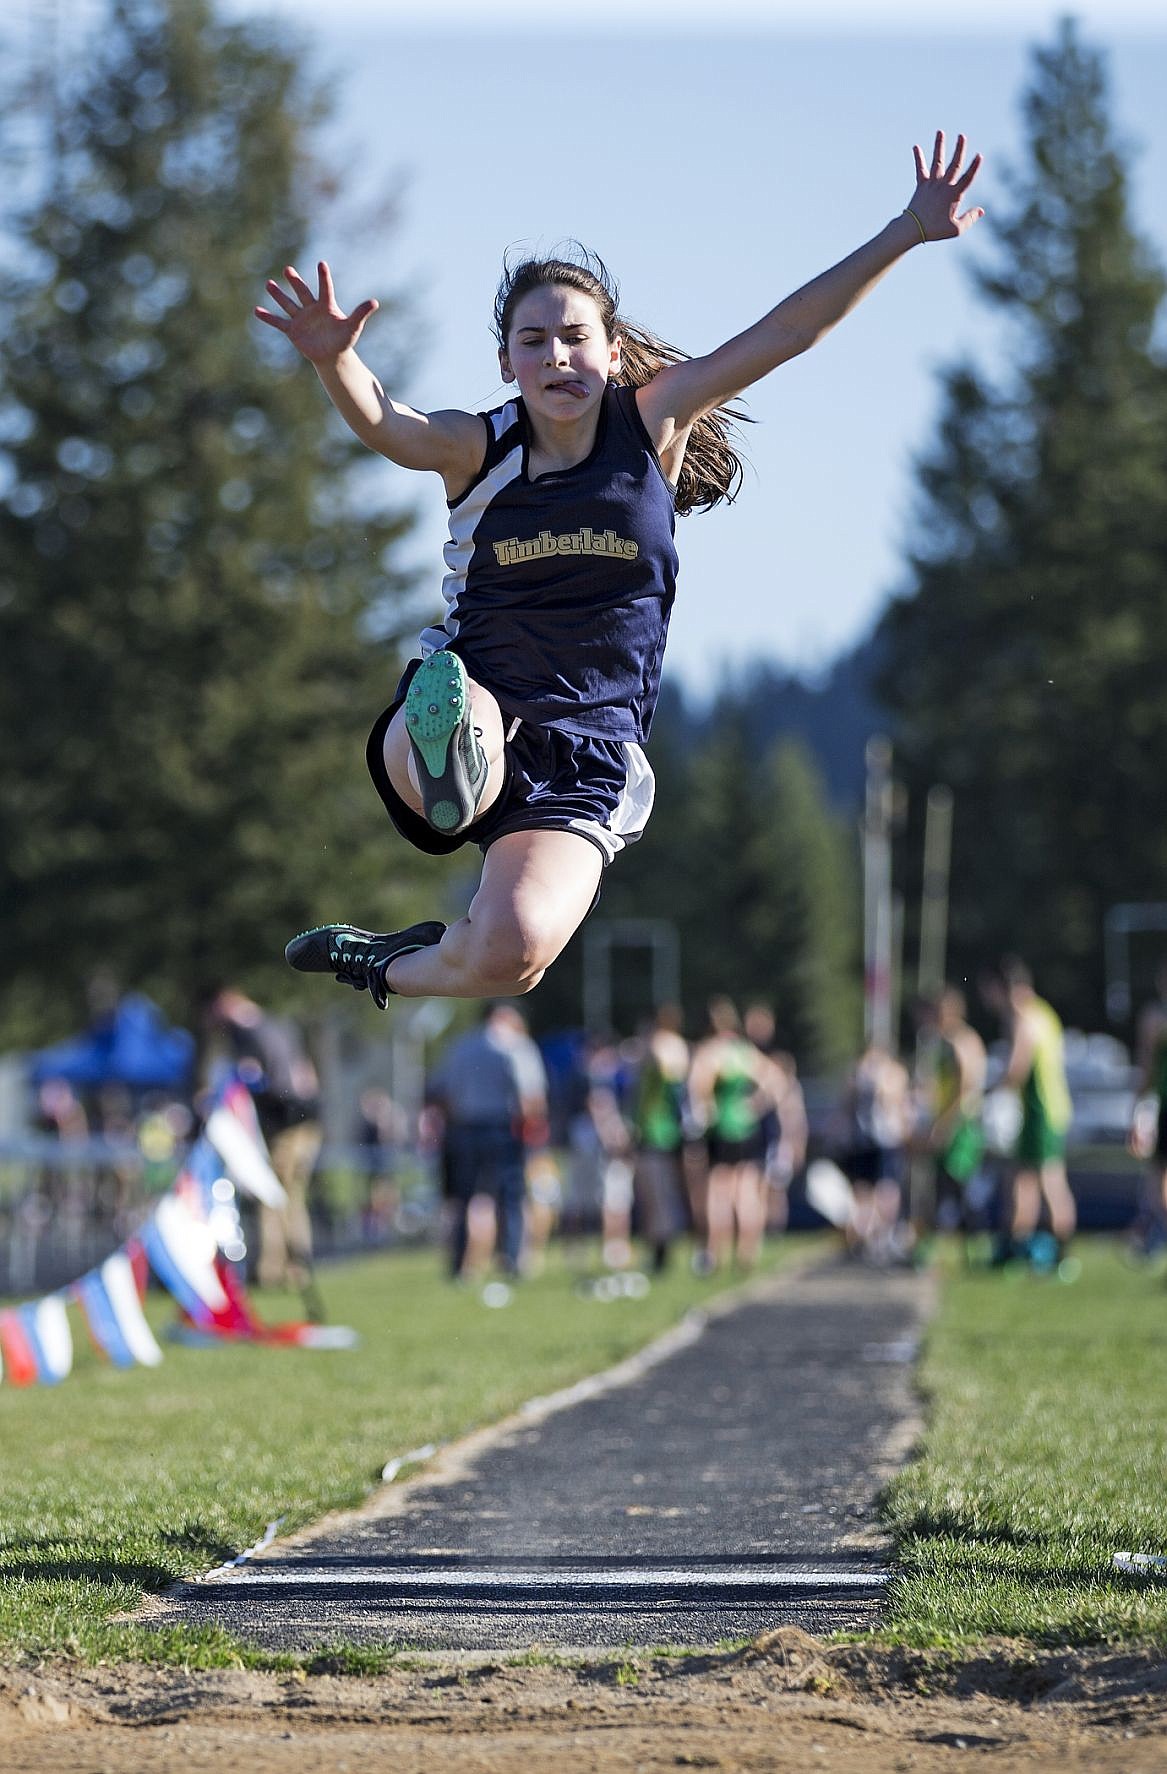 &lt;p&gt;LOREN BENOIT/Press Clair Neelon, of Timberlake High School, leaps with a distance of 13 feet 3/4 inches during the Kootenai County Challenge held at Timberlake High School.&lt;/p&gt;